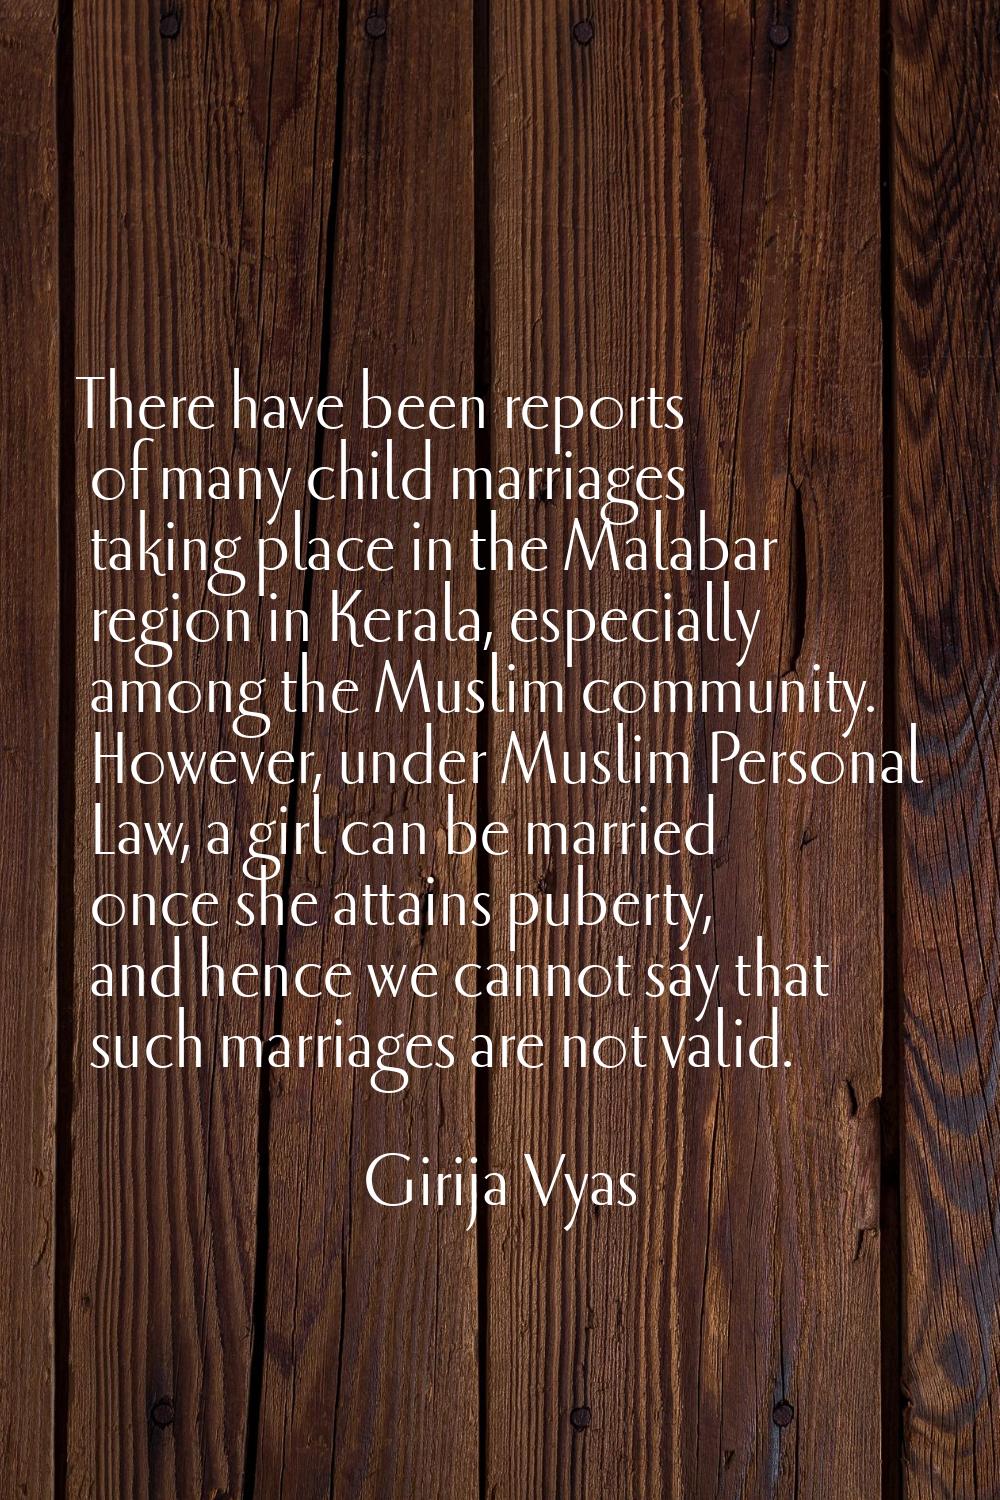 There have been reports of many child marriages taking place in the Malabar region in Kerala, espec